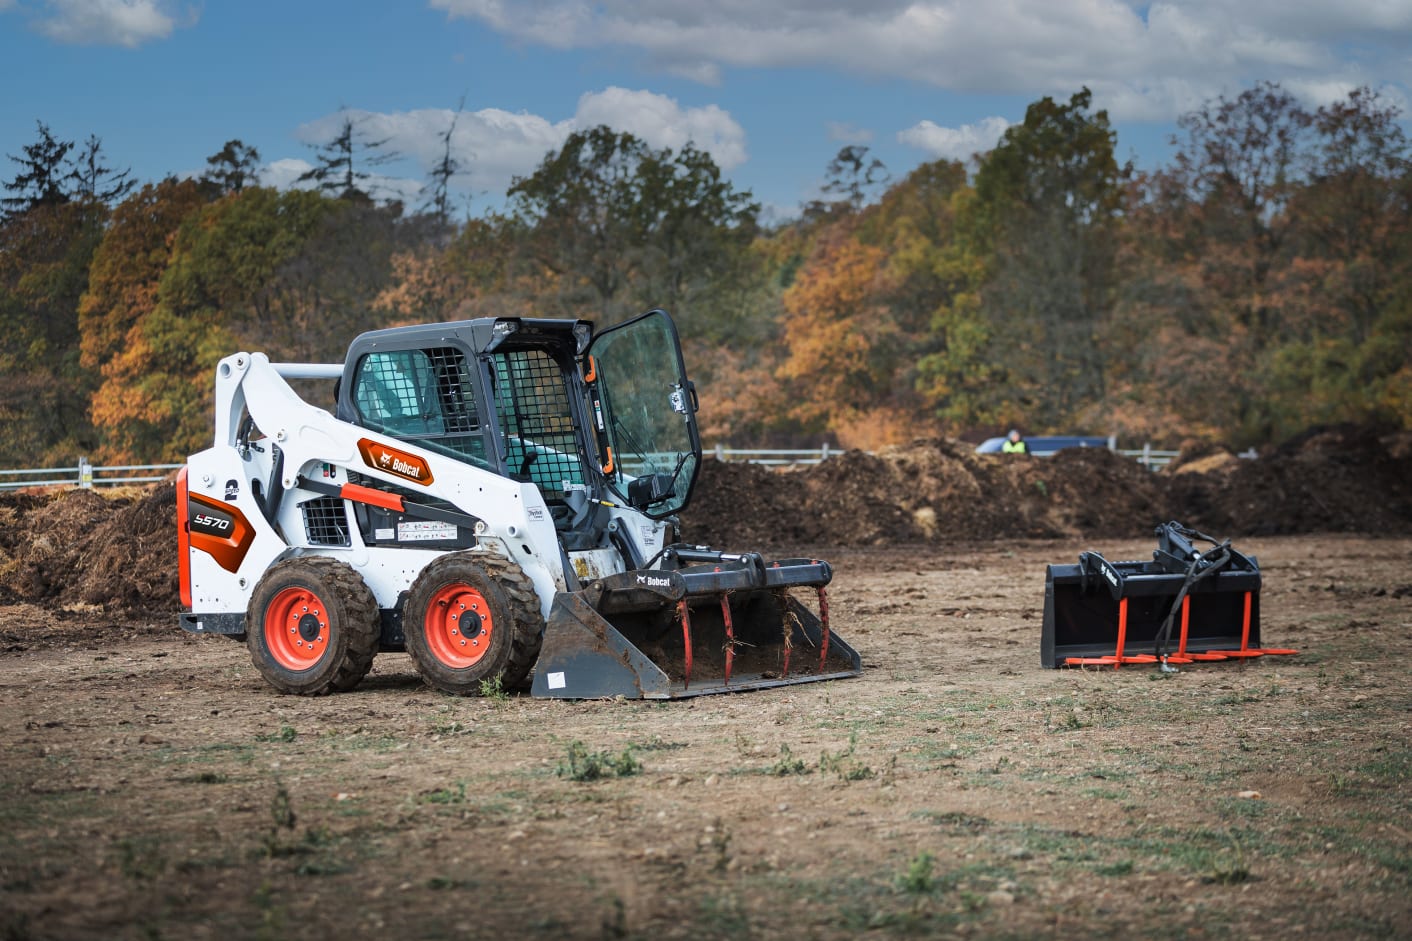 Browse Specs and more for the S570 Skid-Steer Loader - Bobcat of Indy